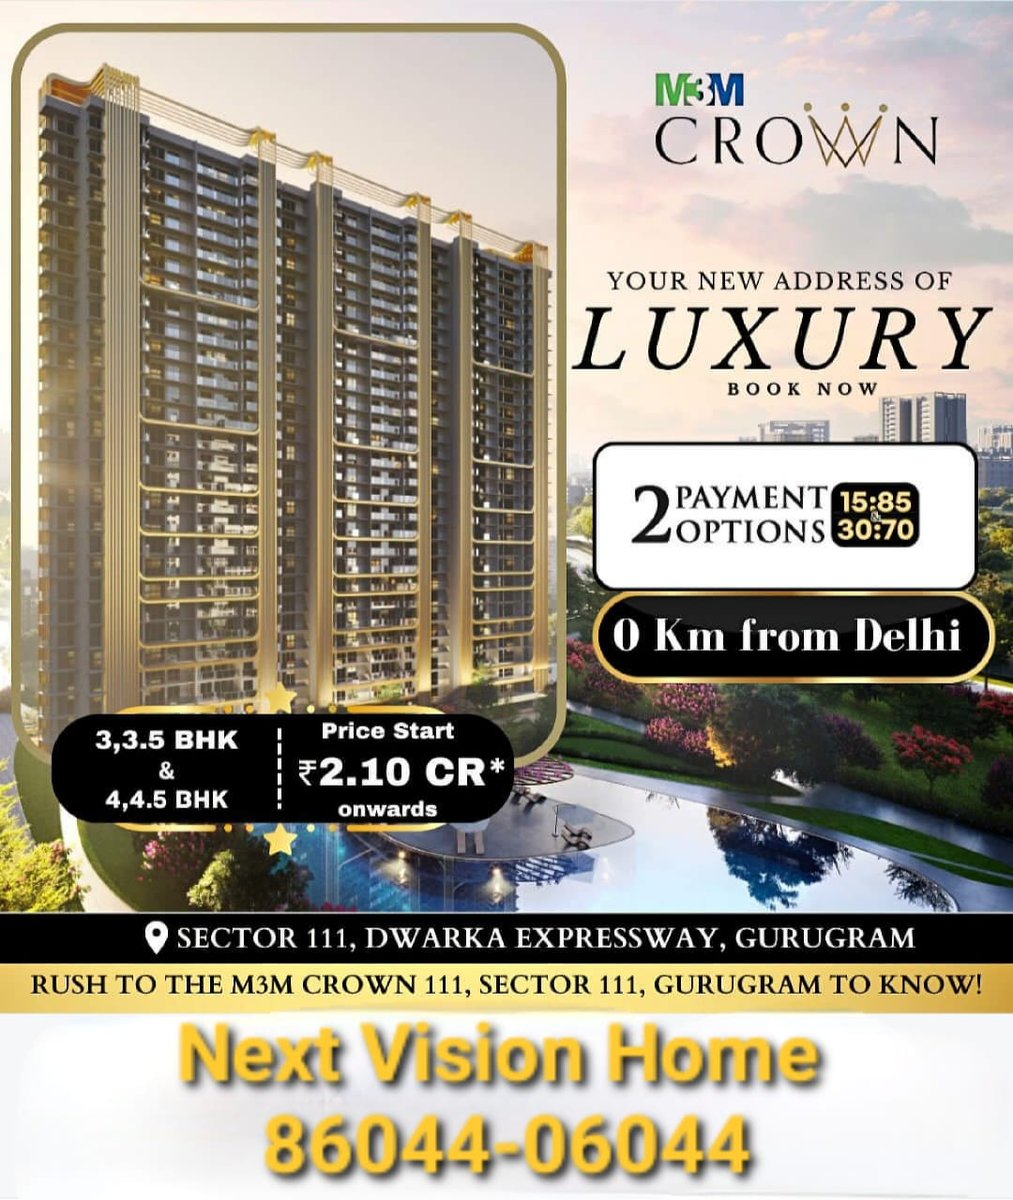 M3M Crown, Ultra Luxury Apartments
Bang on Dwarka Expressway
3/3.5/4/4.5 BHK Start @ 2.10
Cr* Onward, #NextVisionHome - #8604406044
3 Side Air-Conditioned Apartment
Sec-111, Dwarka Expressway, Gurgaon
#nextivisionhome #luxuryapartment, #m3mgurgaon,
#highriseapartment